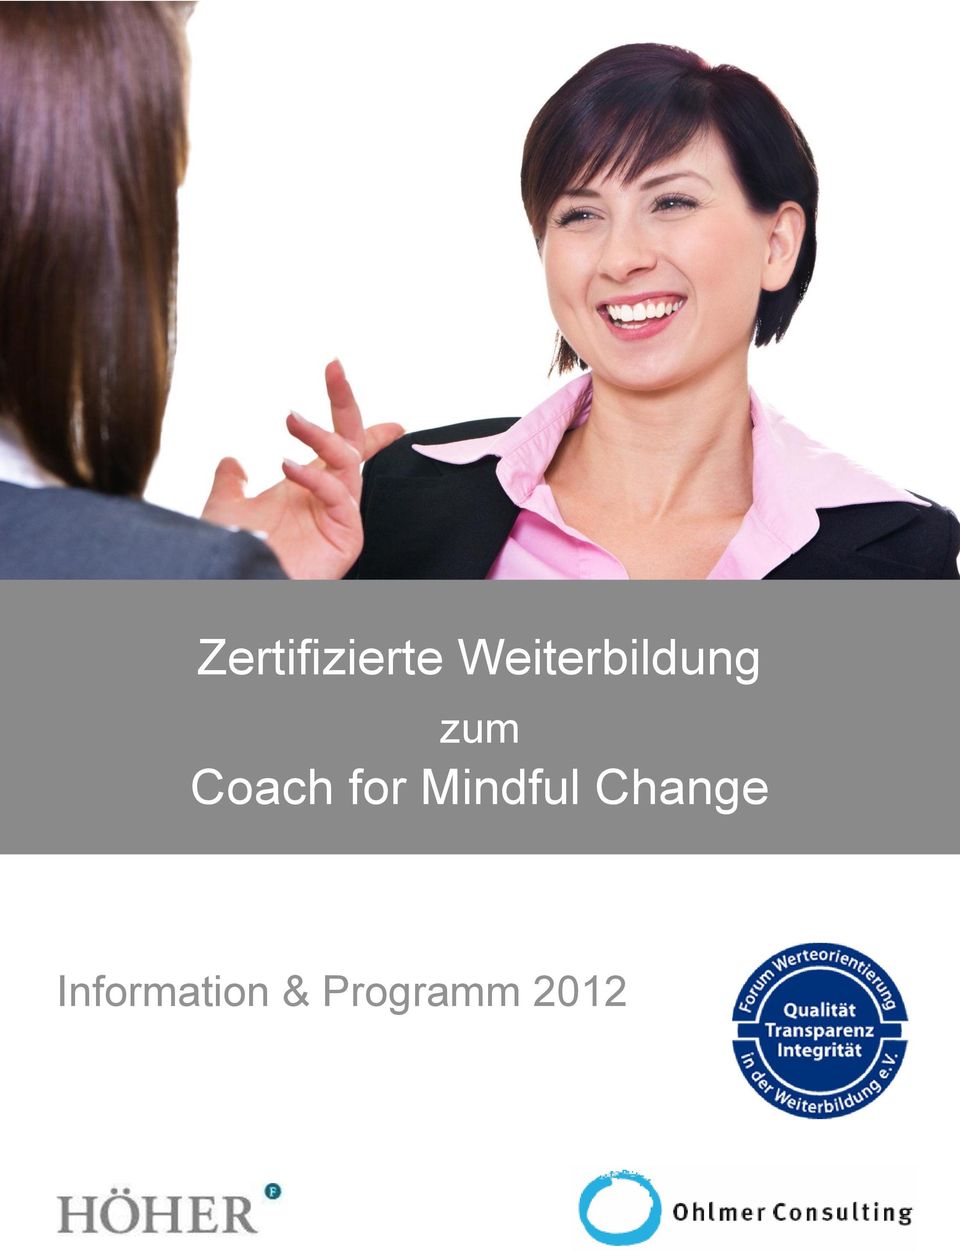 Coach for Mindful